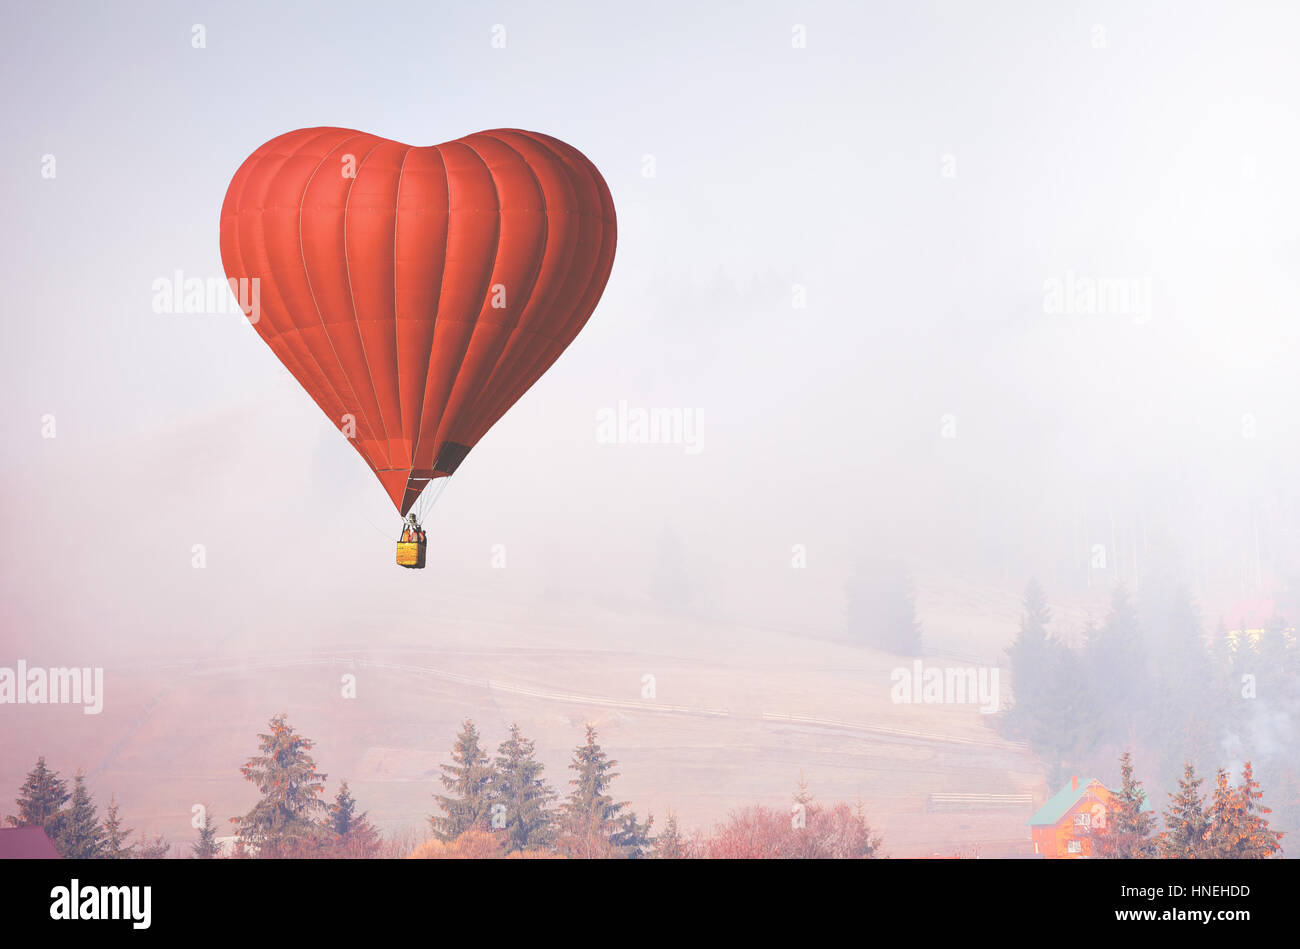 d air balloon in the shape of a heart flying in foggy forest Stock Photo